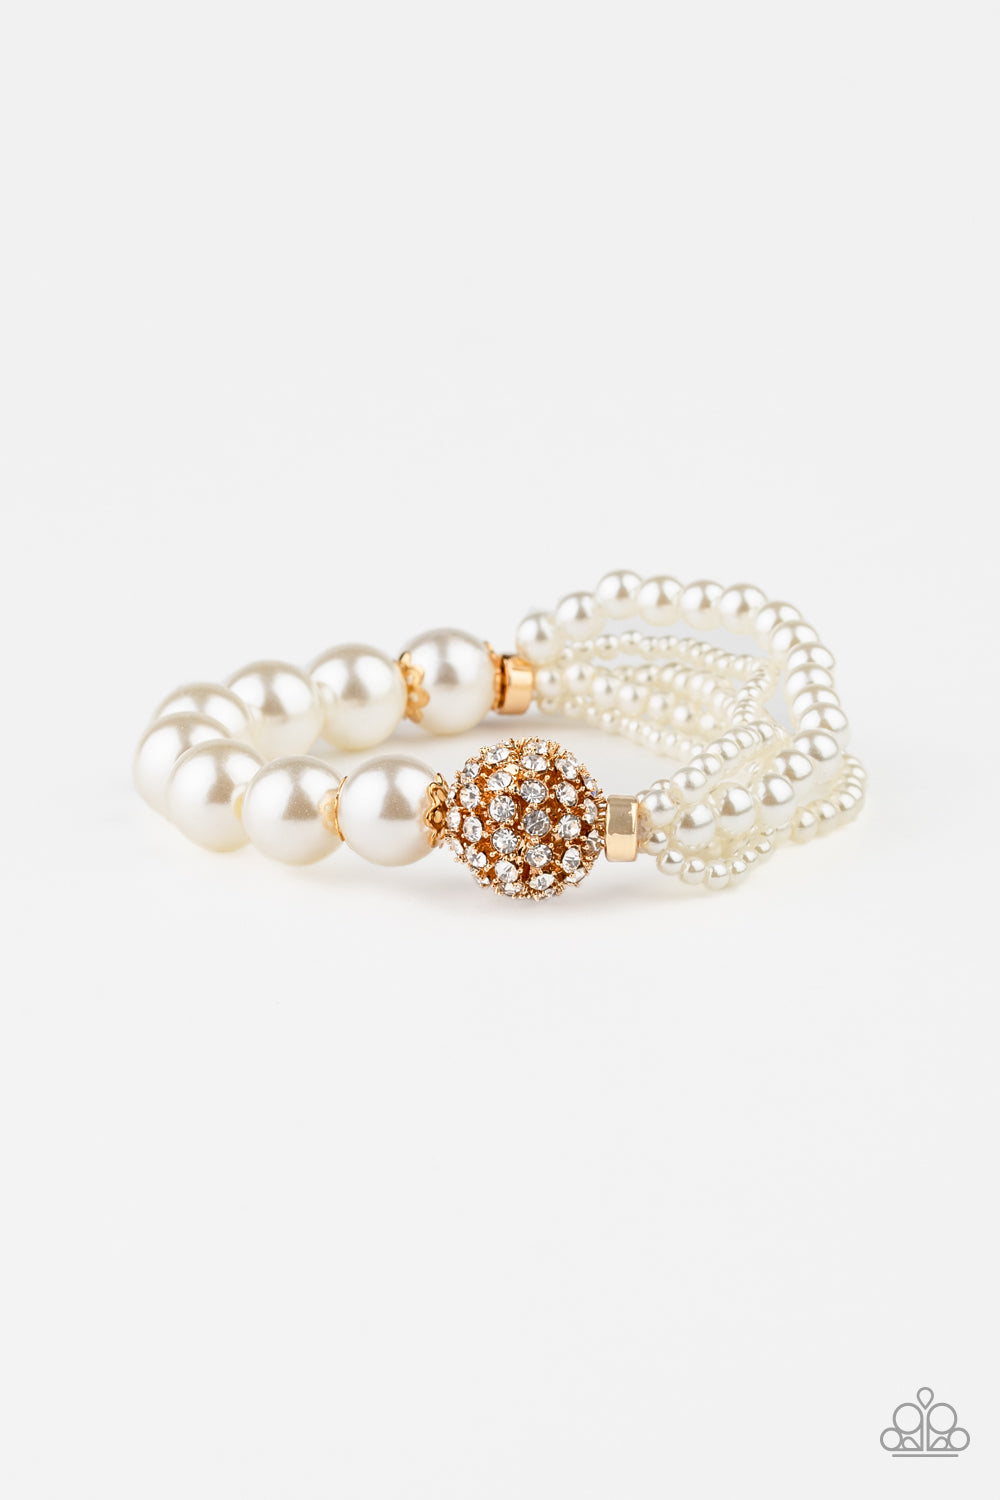 Paparazzi Vintage Collision - Gold Pearl Bracelet - A Finishing Touch 